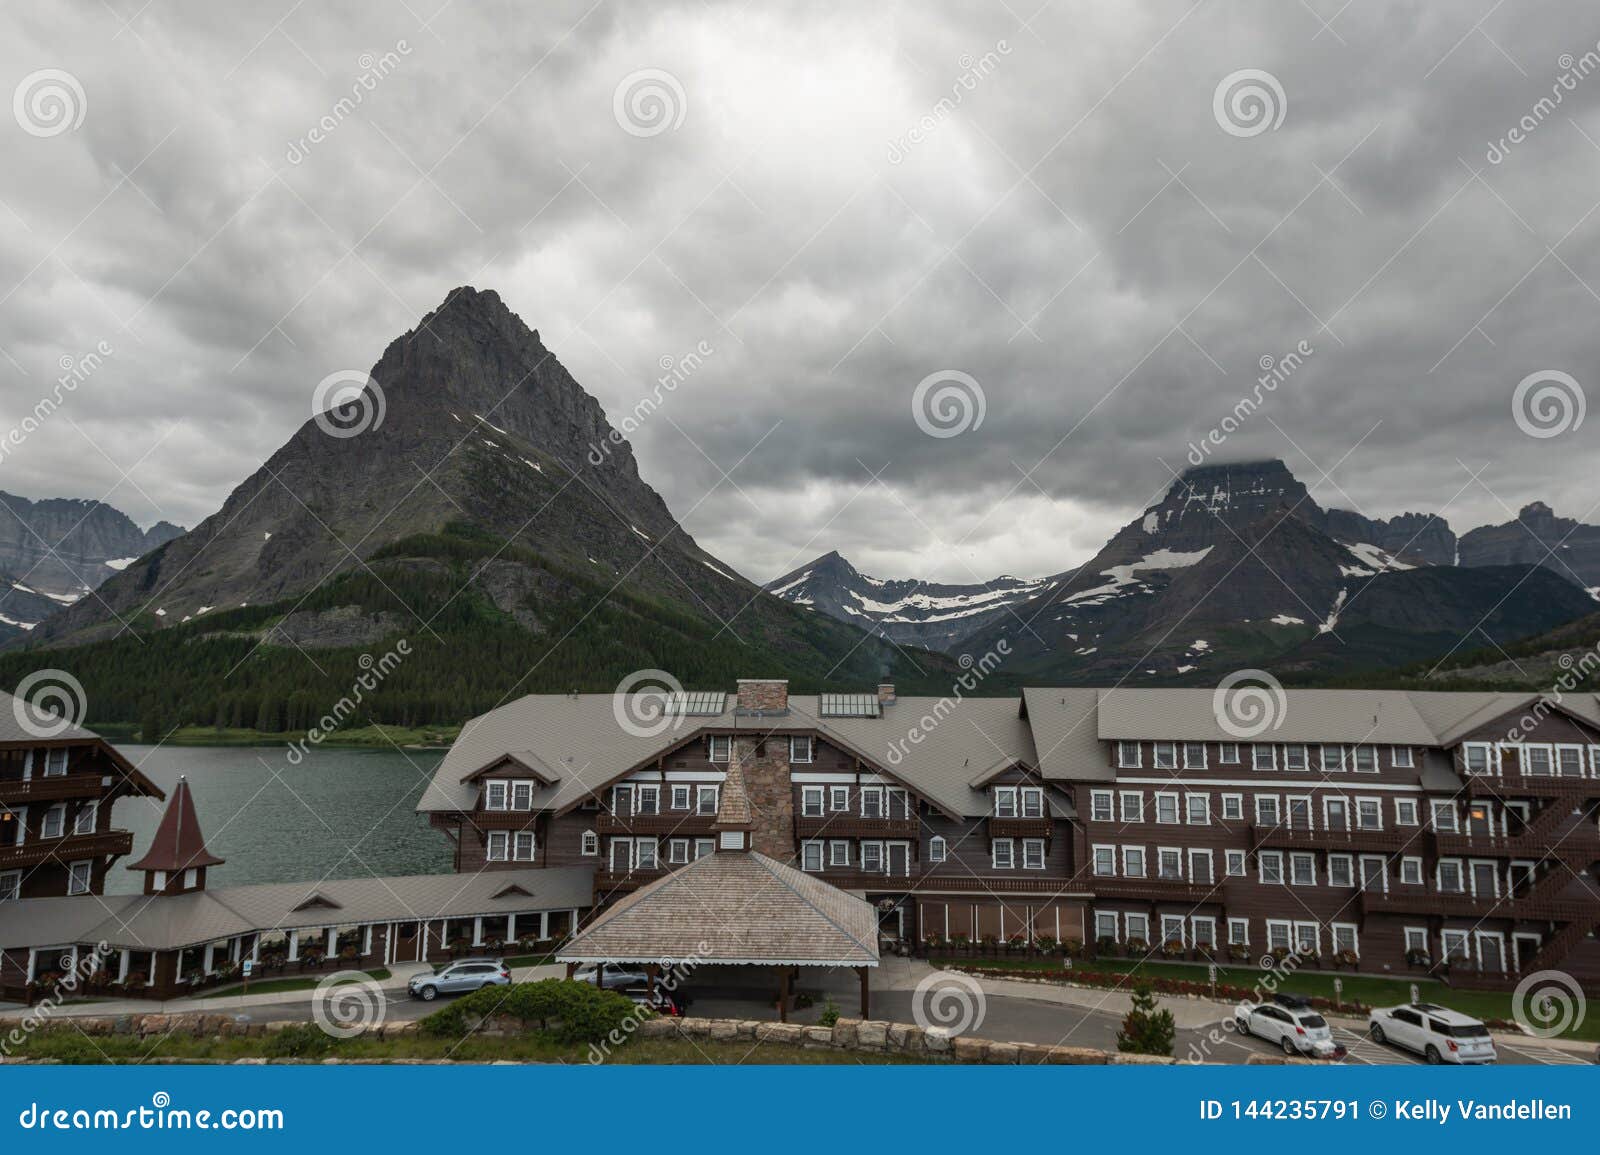 many glacier hotel and grinnell point